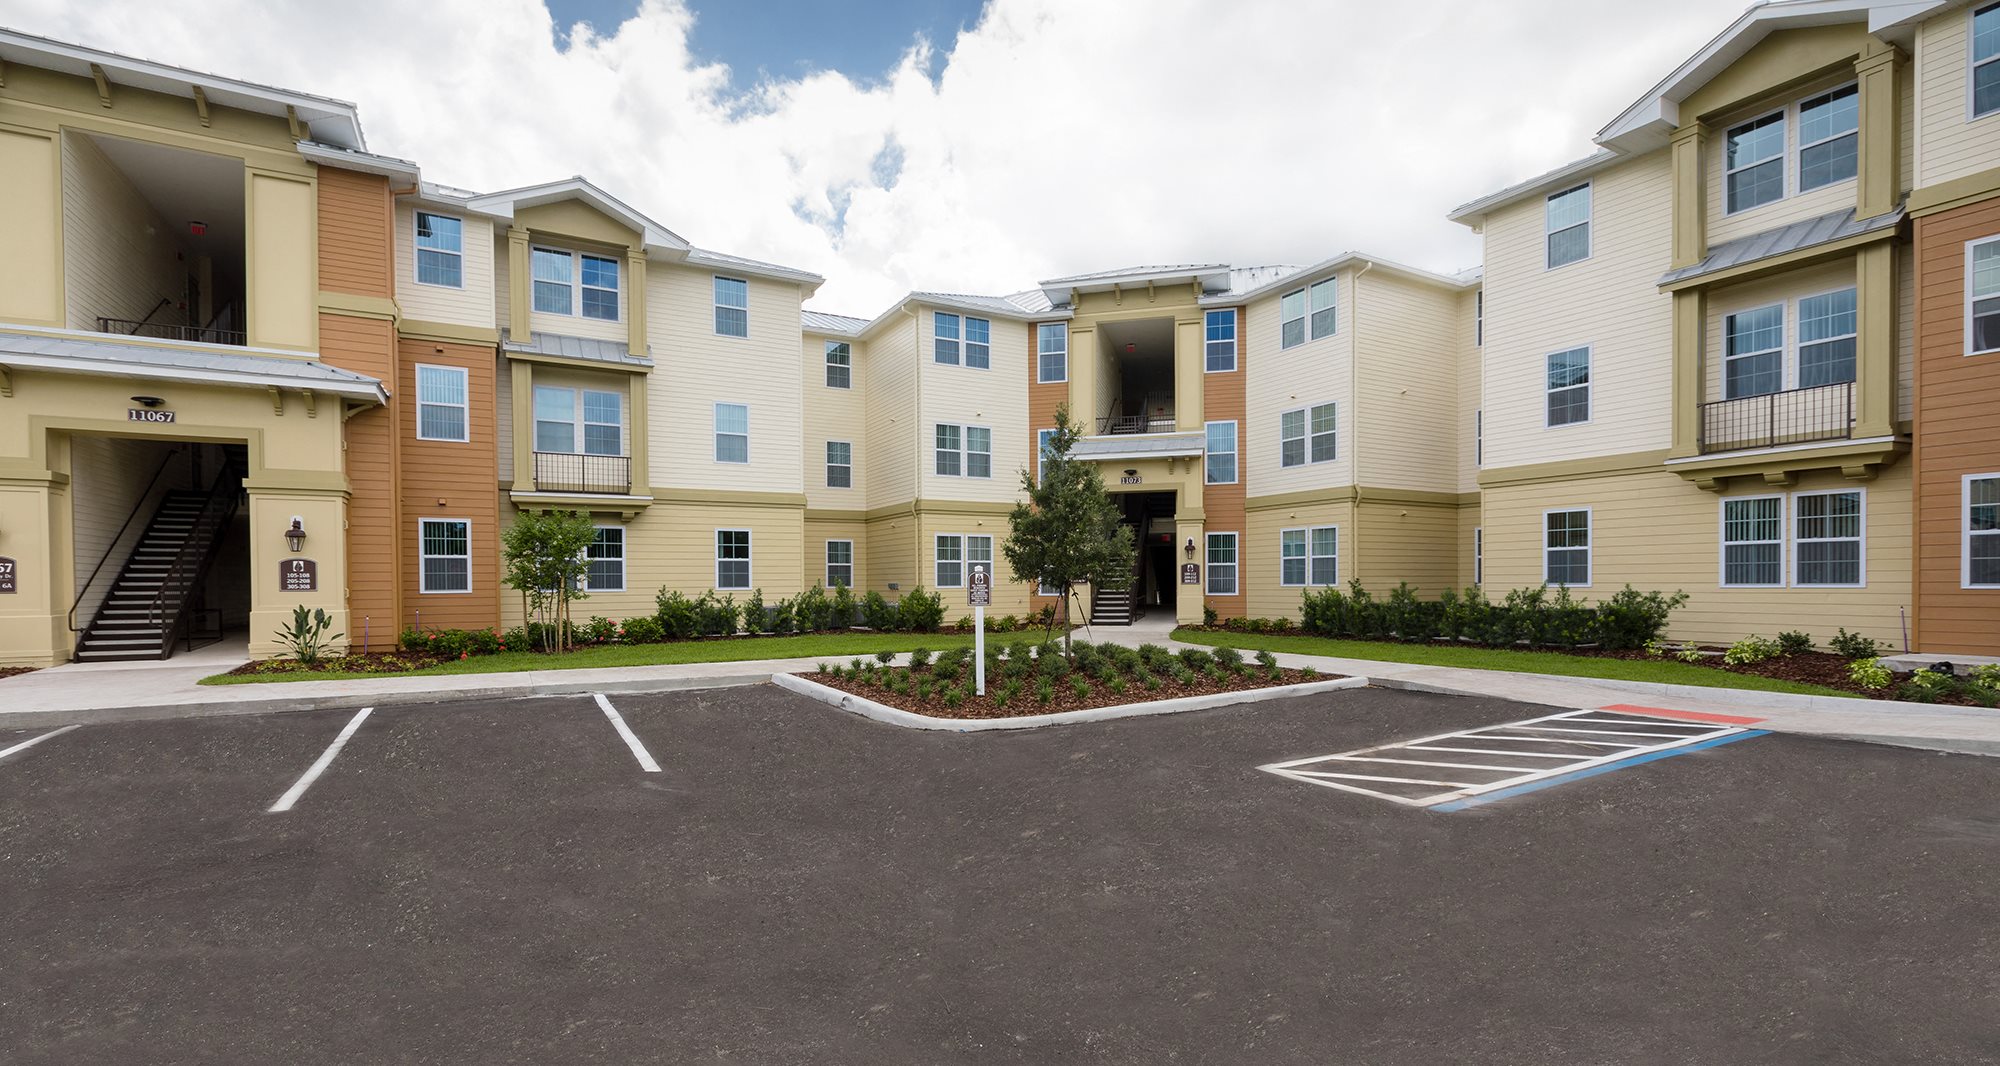 Westwood Park Apartments   Apartments in Orlando, FL   Concord Rents